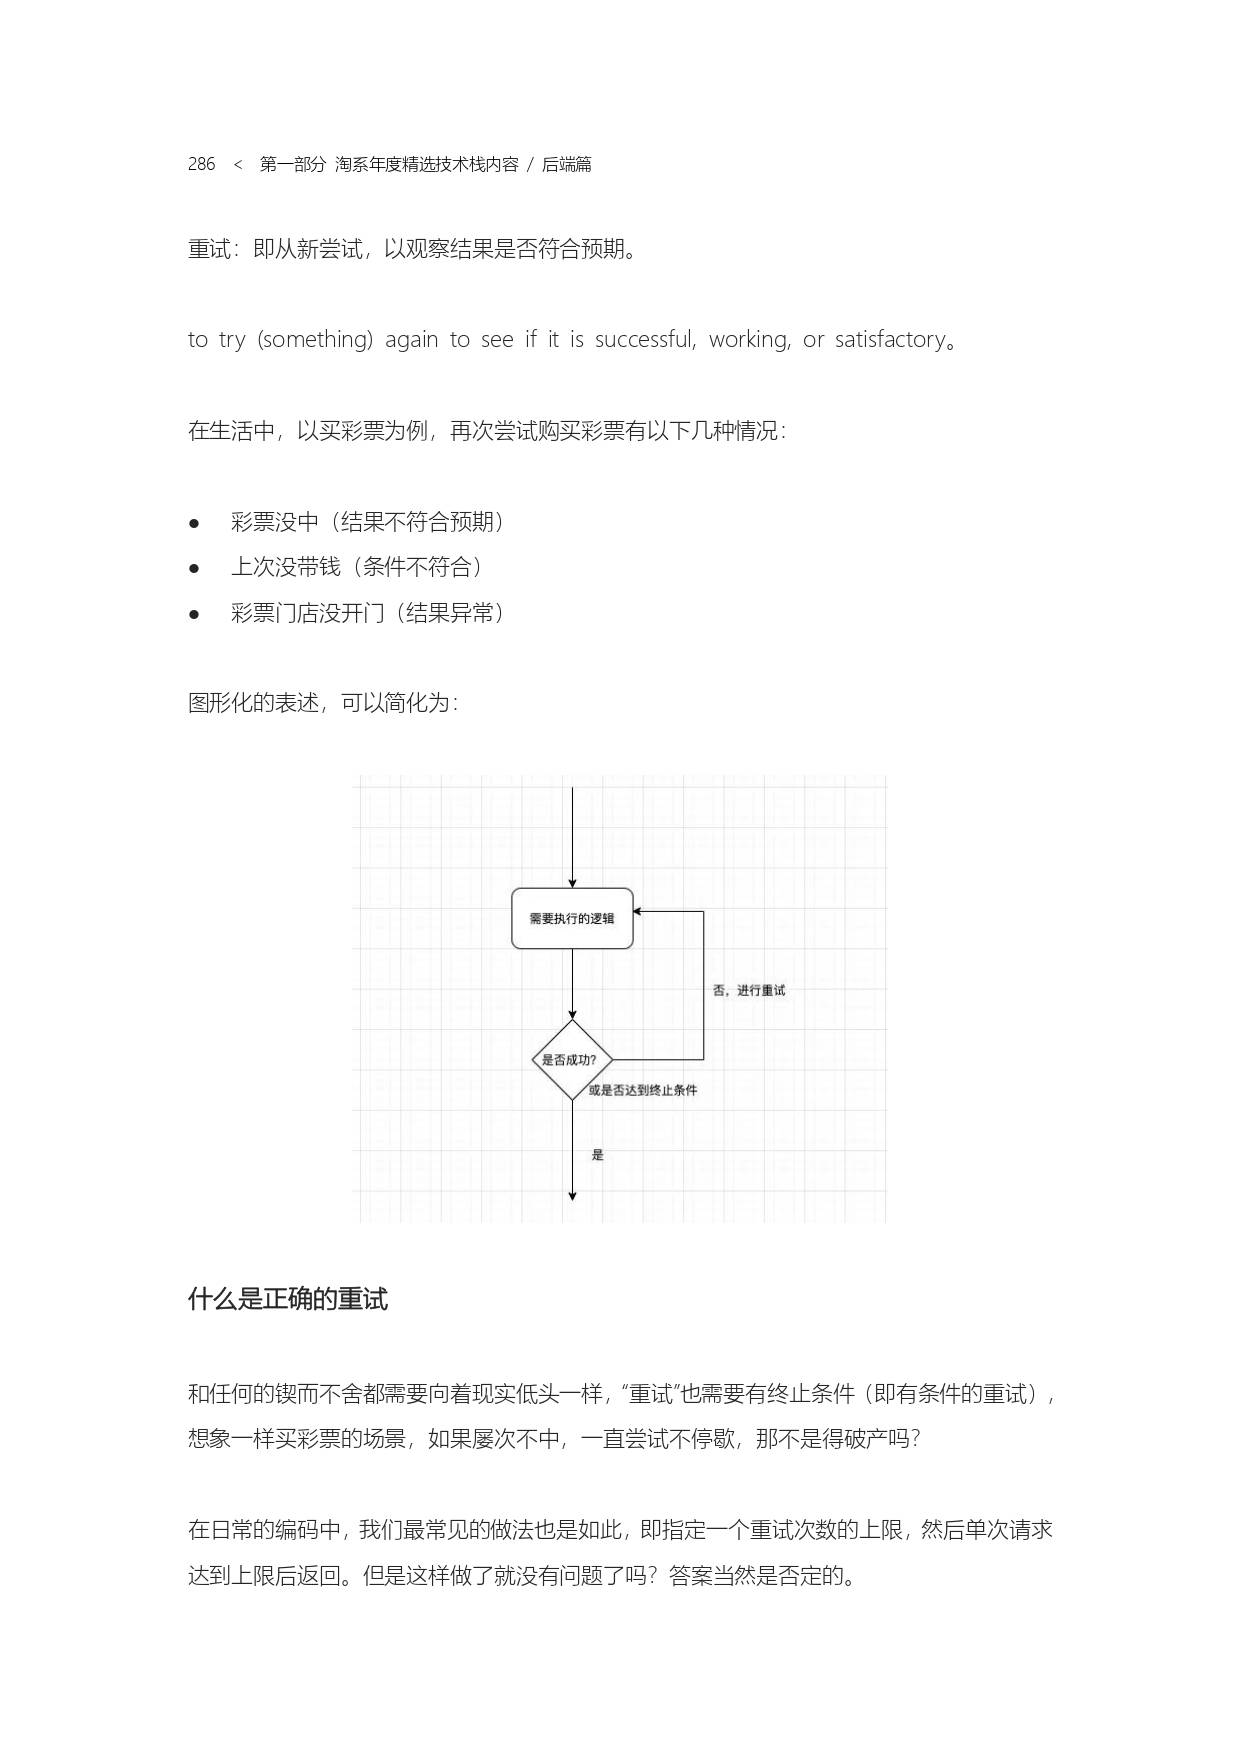 The Complete Works of Tao Technology 2020-1-570_page-0286.jpg